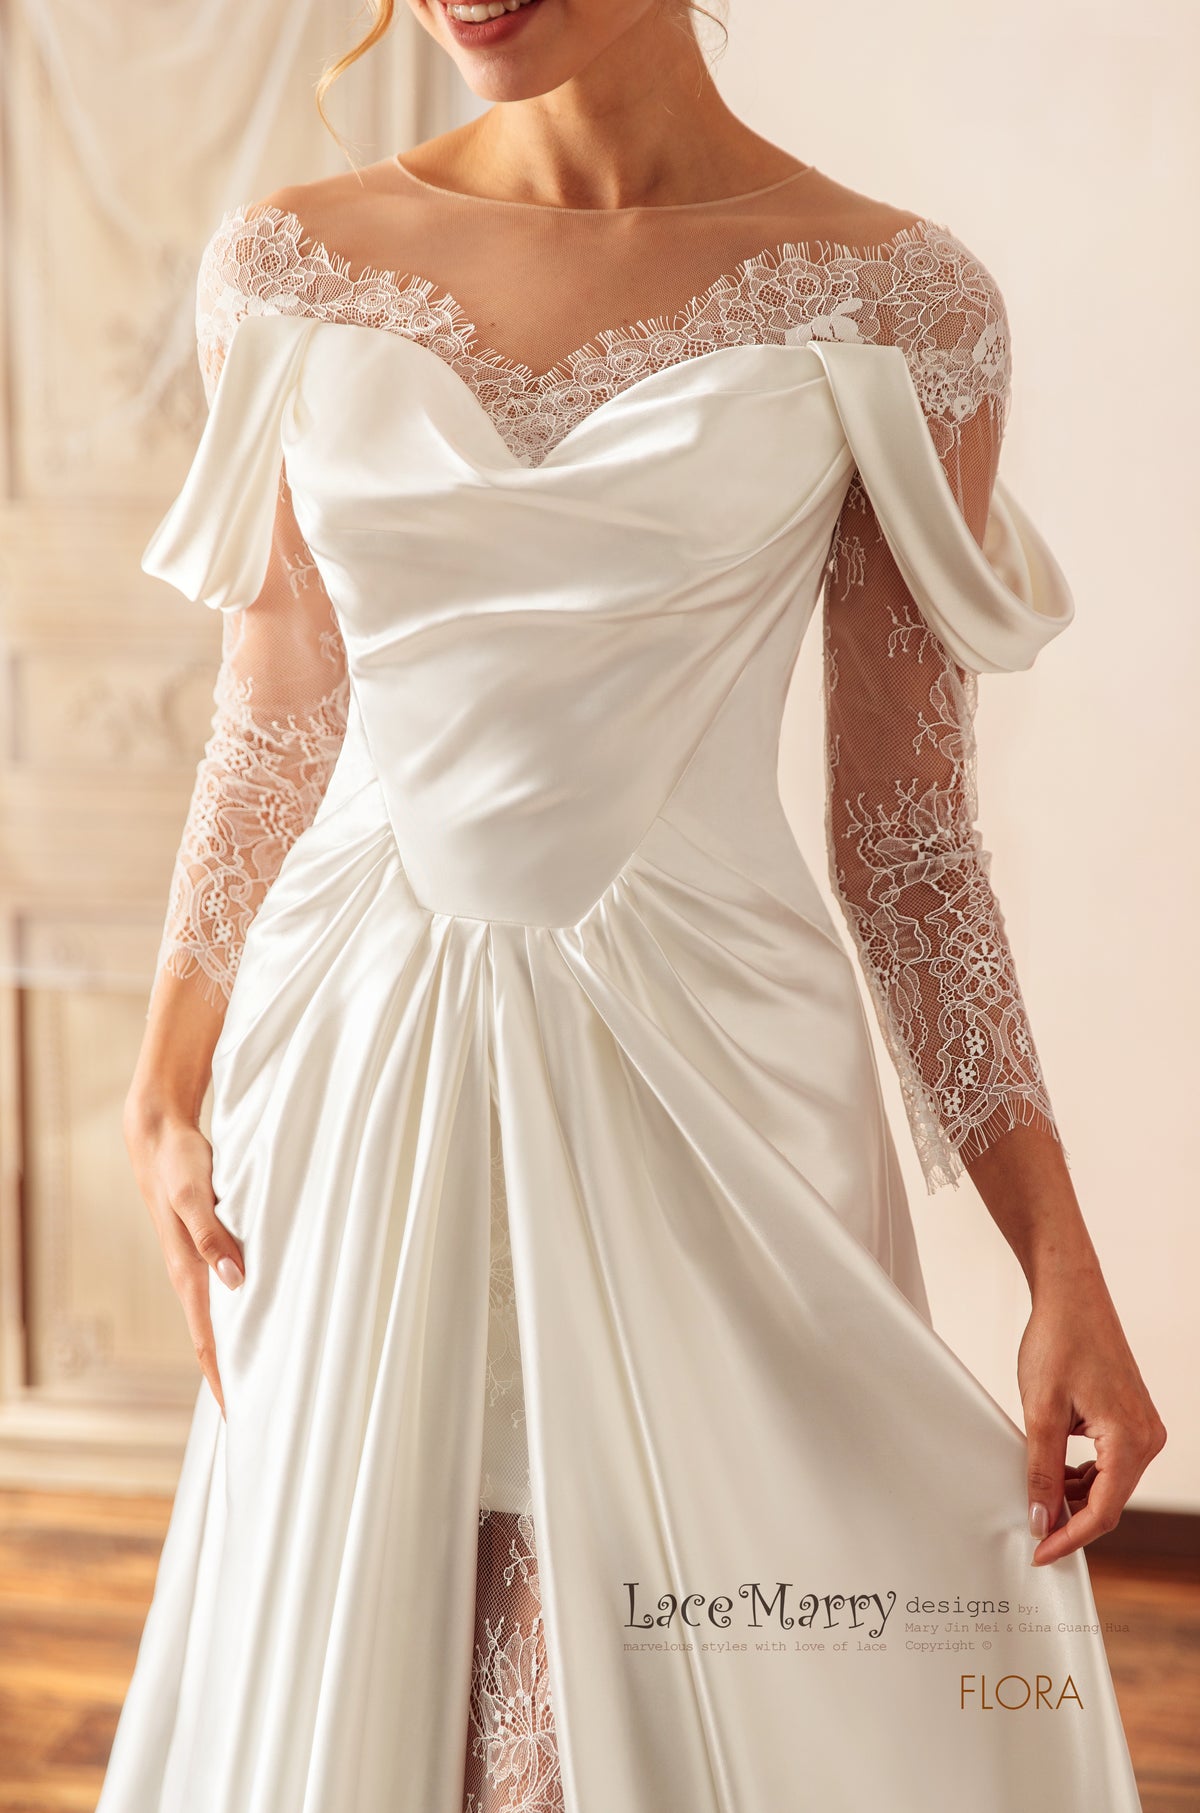 FLORA / Illusion Neck Lace Wedding Dress with Slit on the Skirt